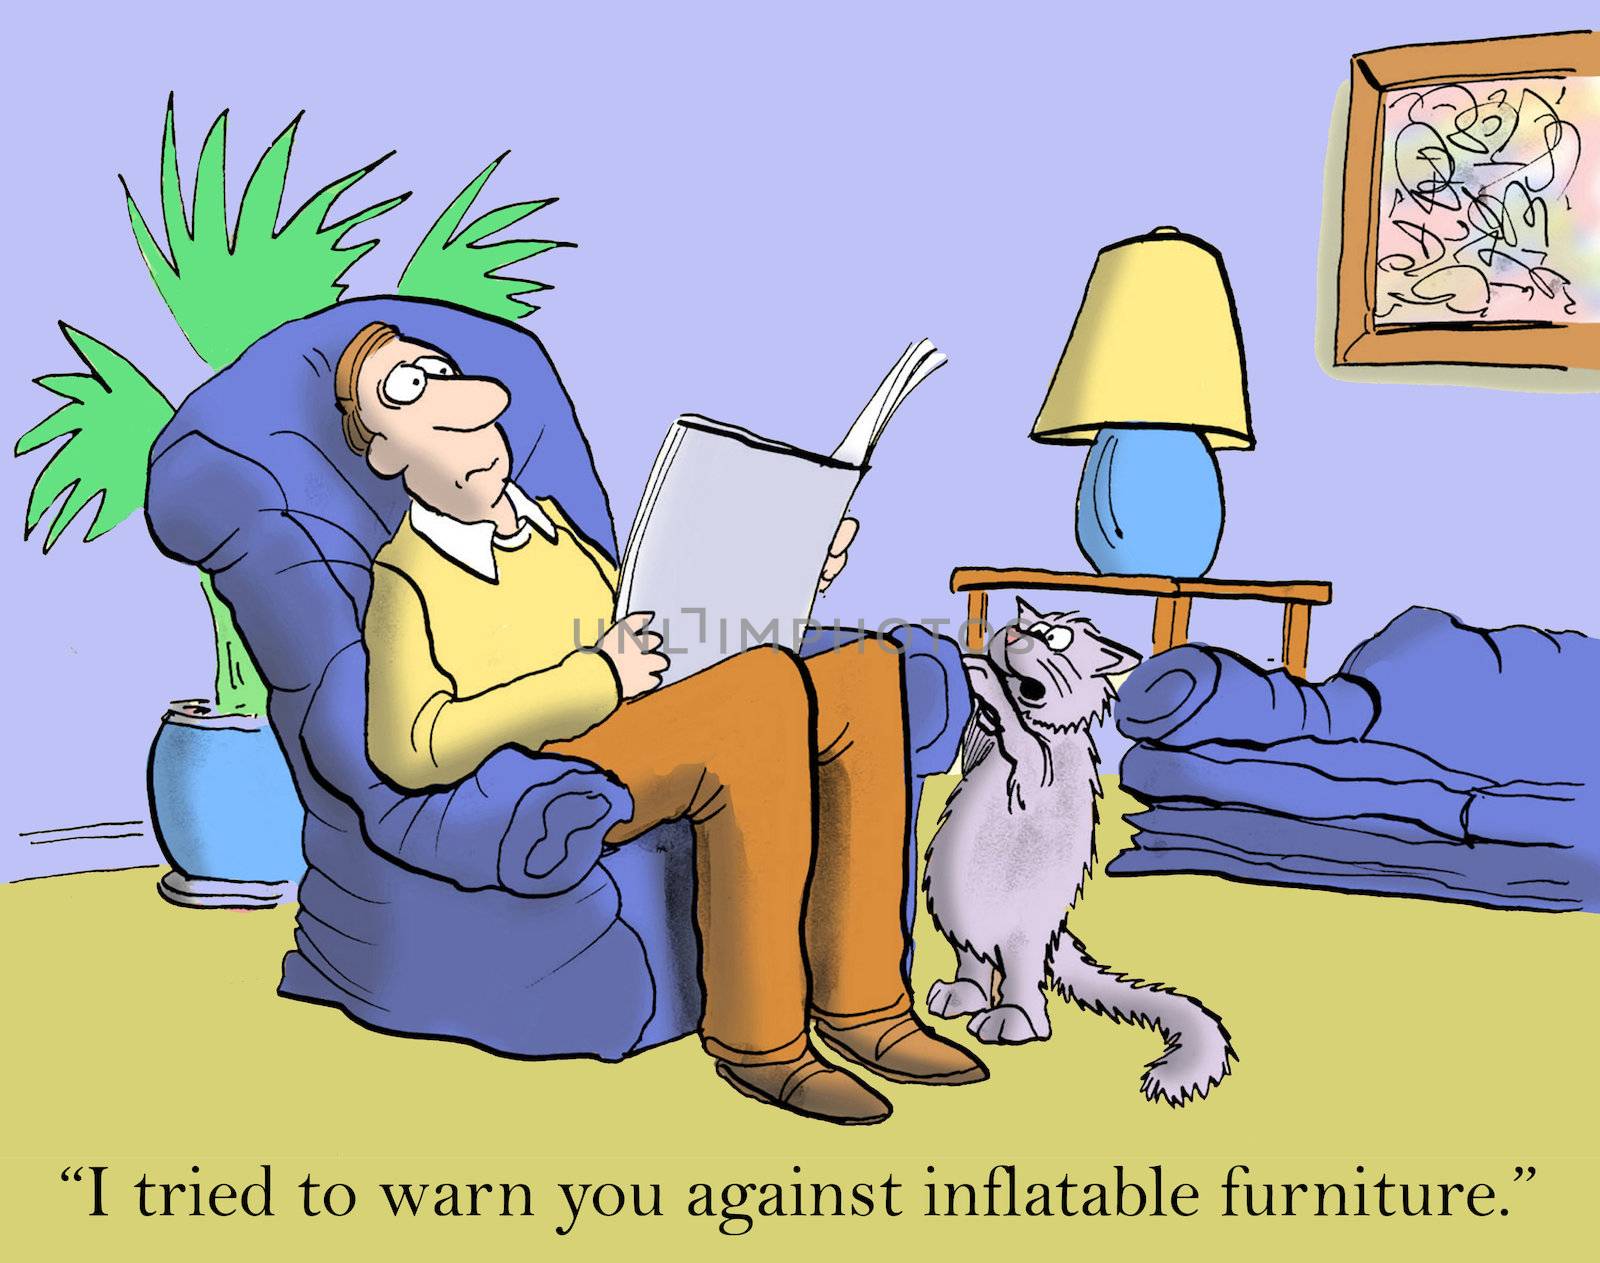 "I tried to warn you against inflatable furniture."